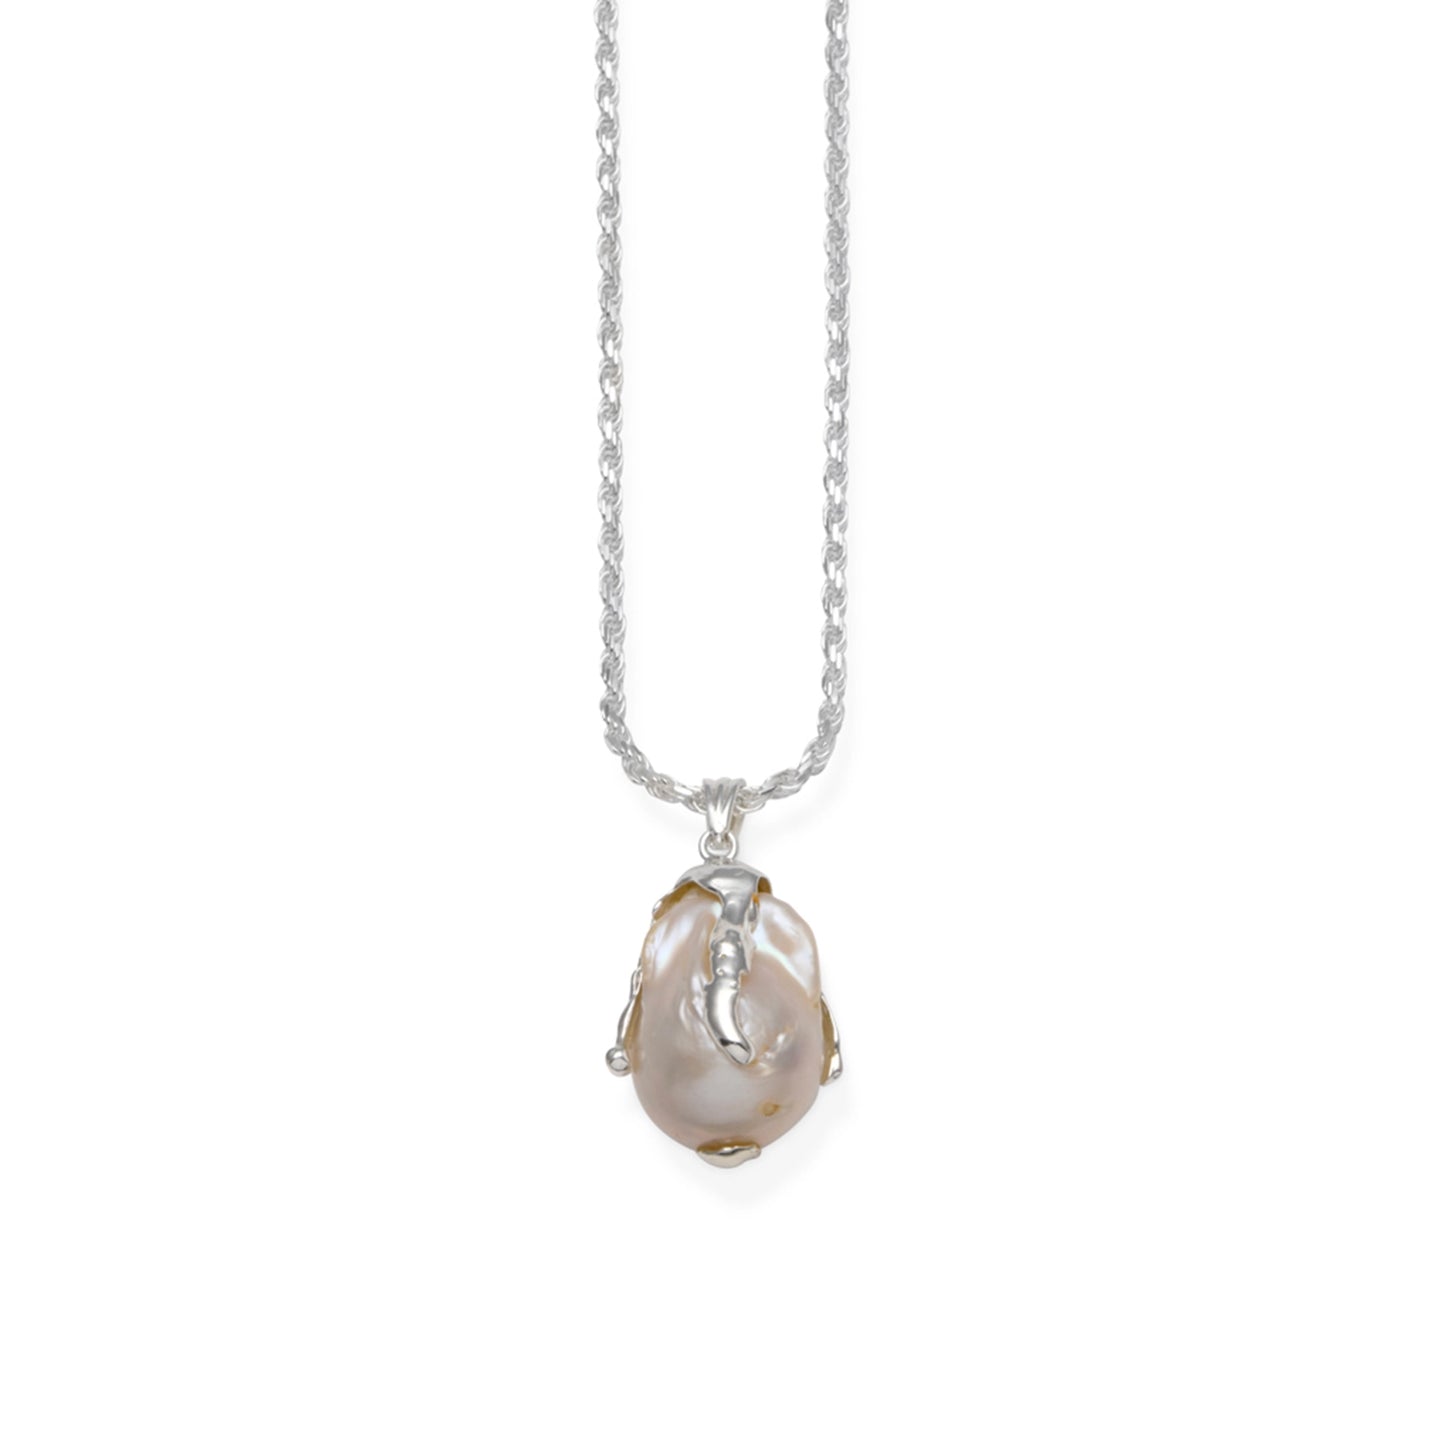 VT BAROQUE PEARL ON ROPE CHAIN NECKLACE